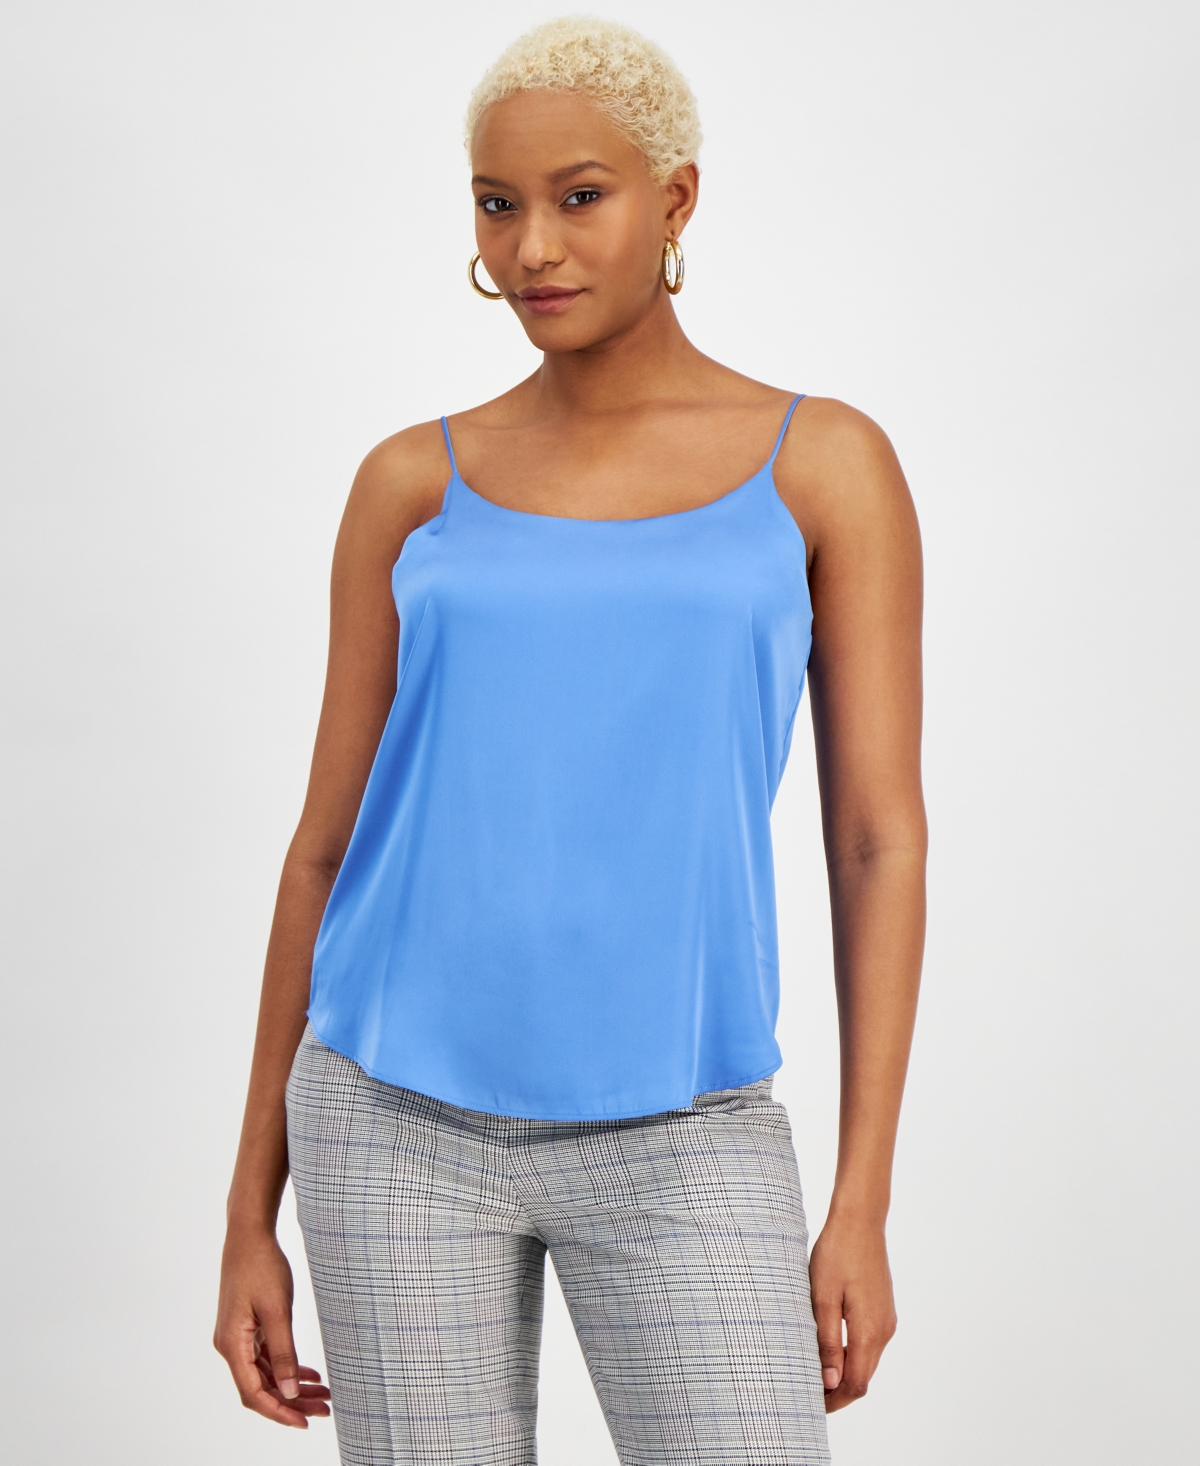 Women's Scoop-Neck Camisole, Created for Macy's - Delft Blue